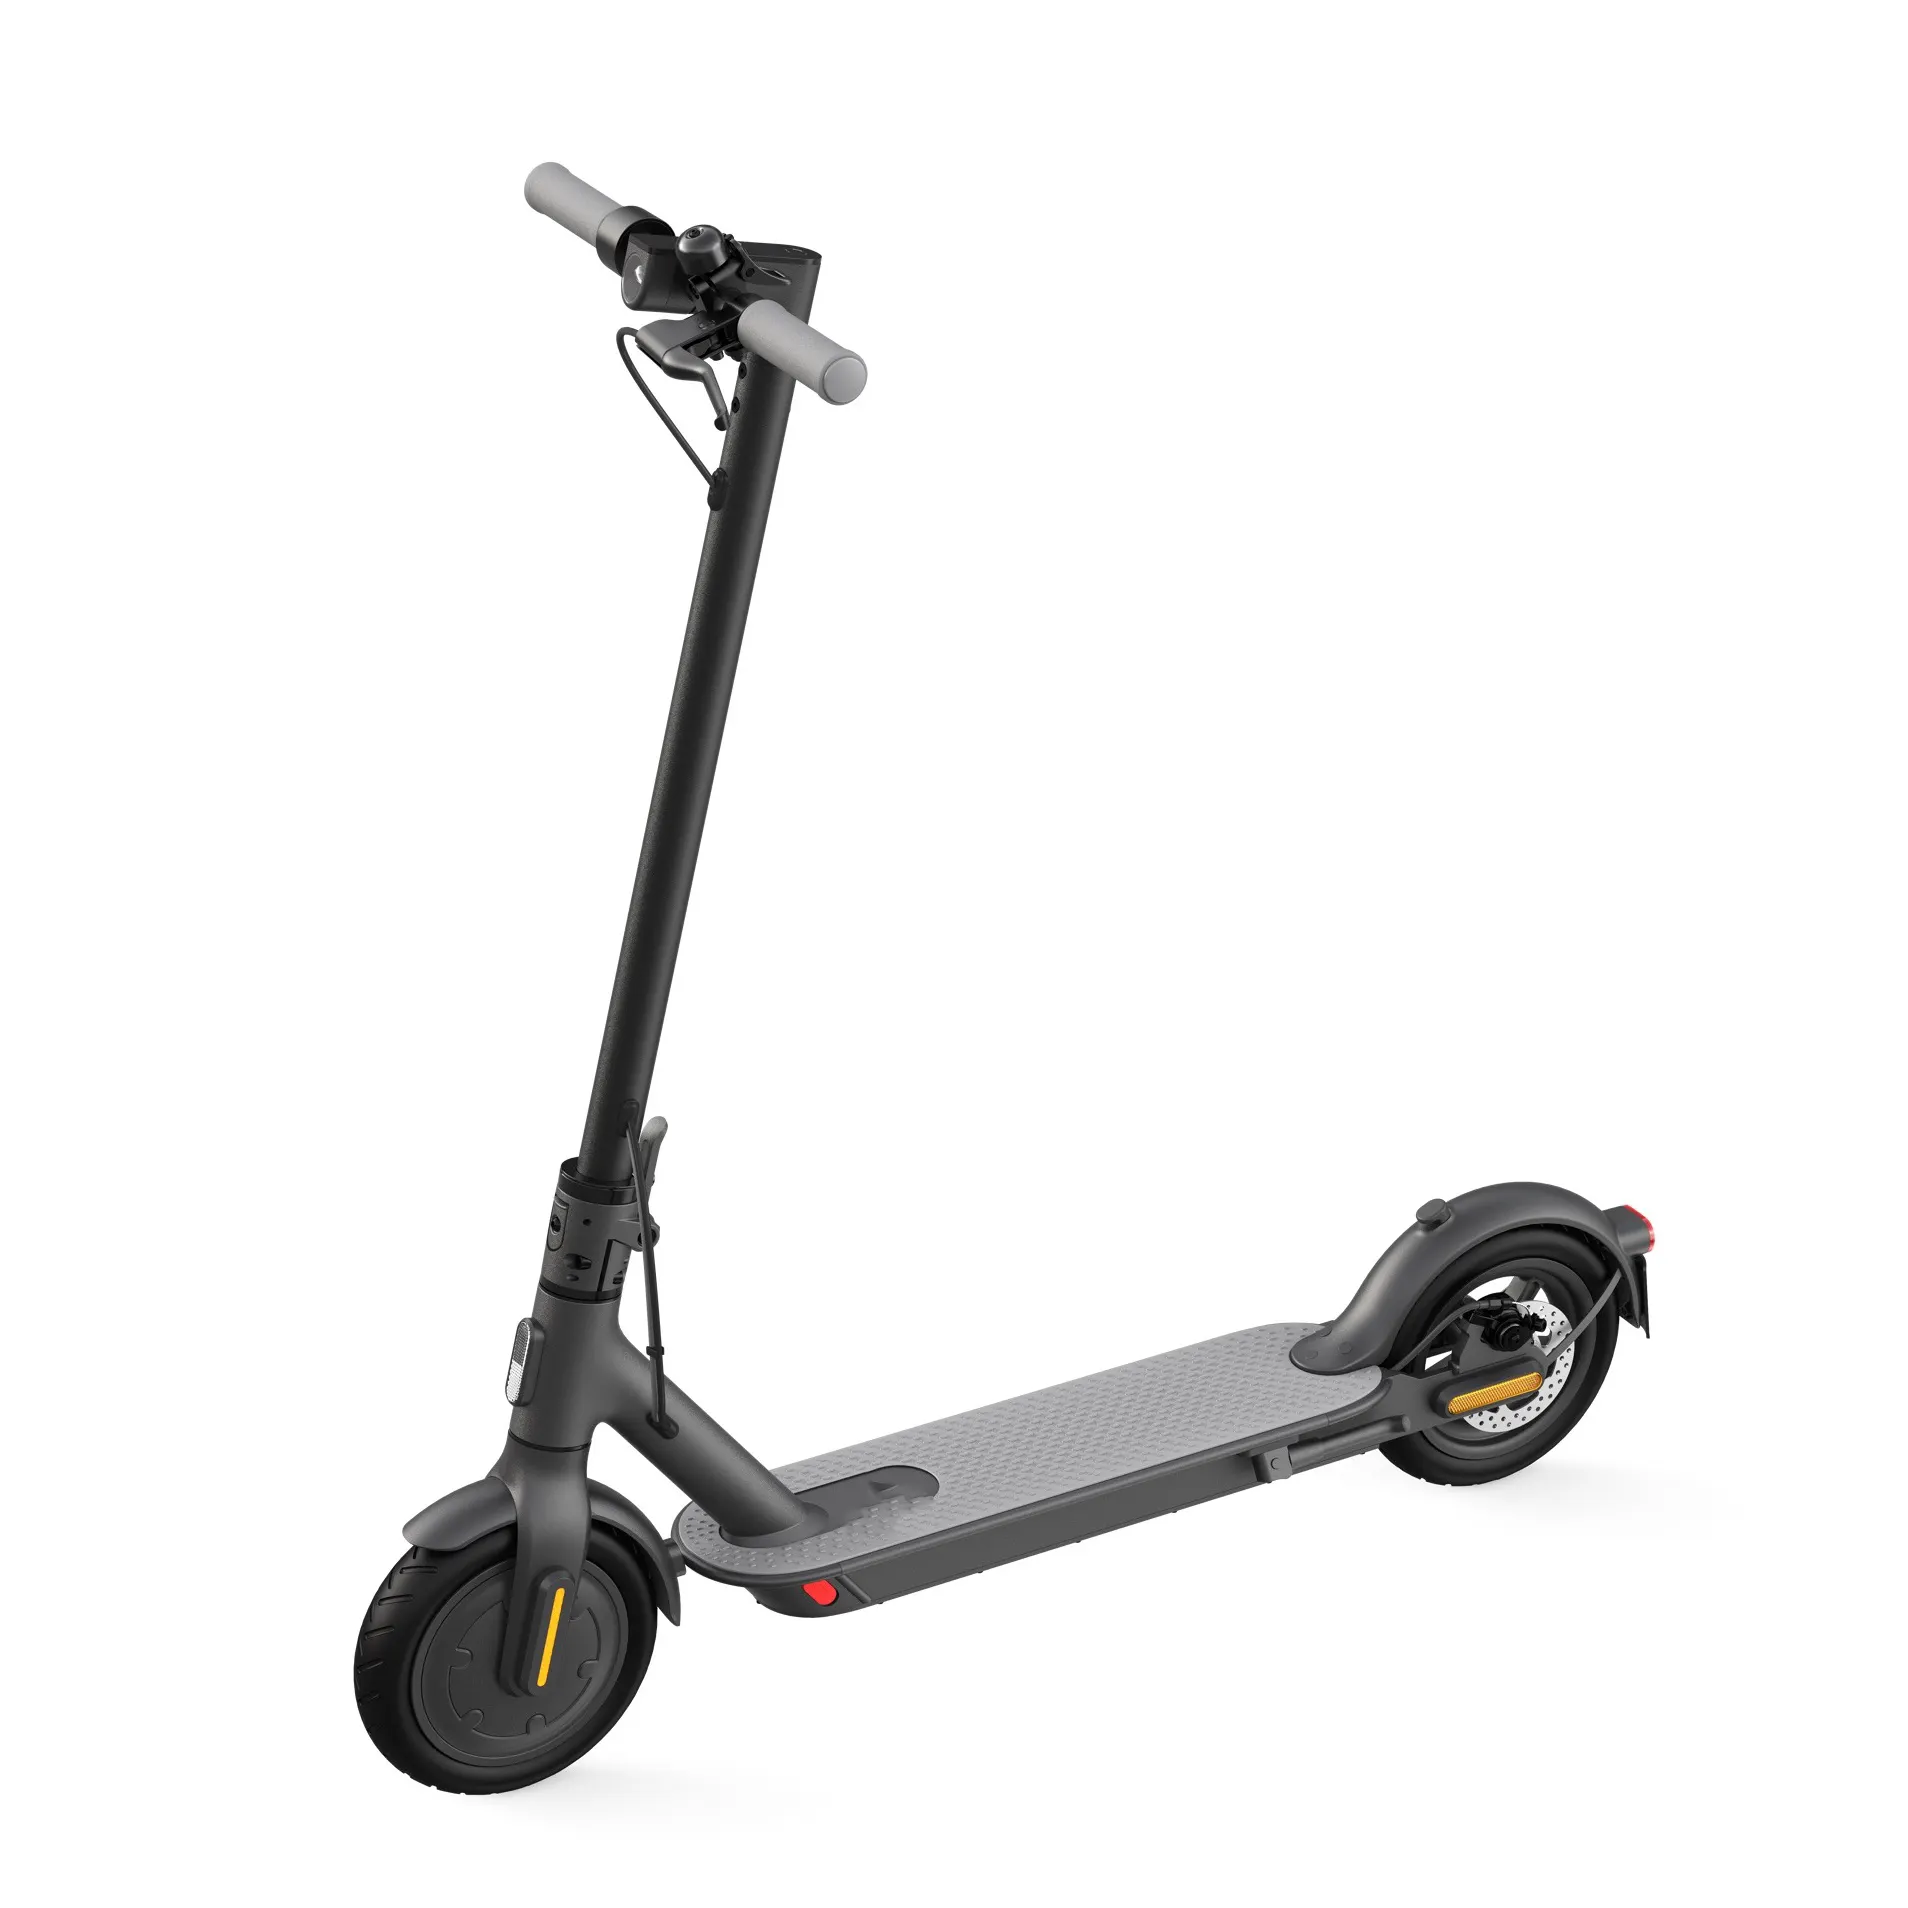 Buy Original Foldable Electric Scooter With Best price offer in the market available now - Contact Us